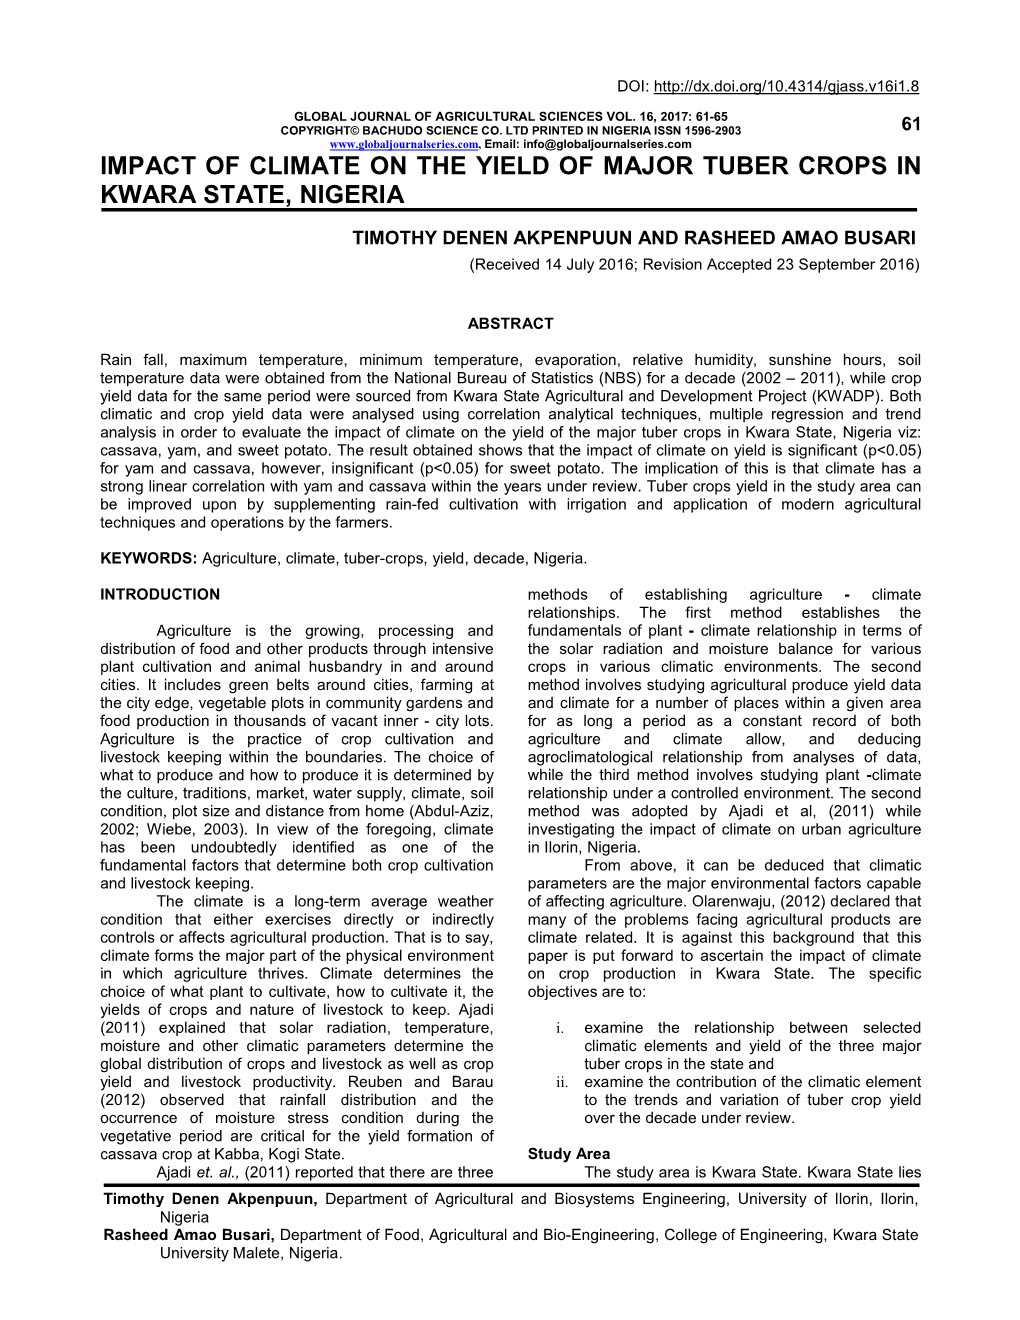 Impact of Climate on the Yield of Major Tuber Crops in Kwara State, Nigeria